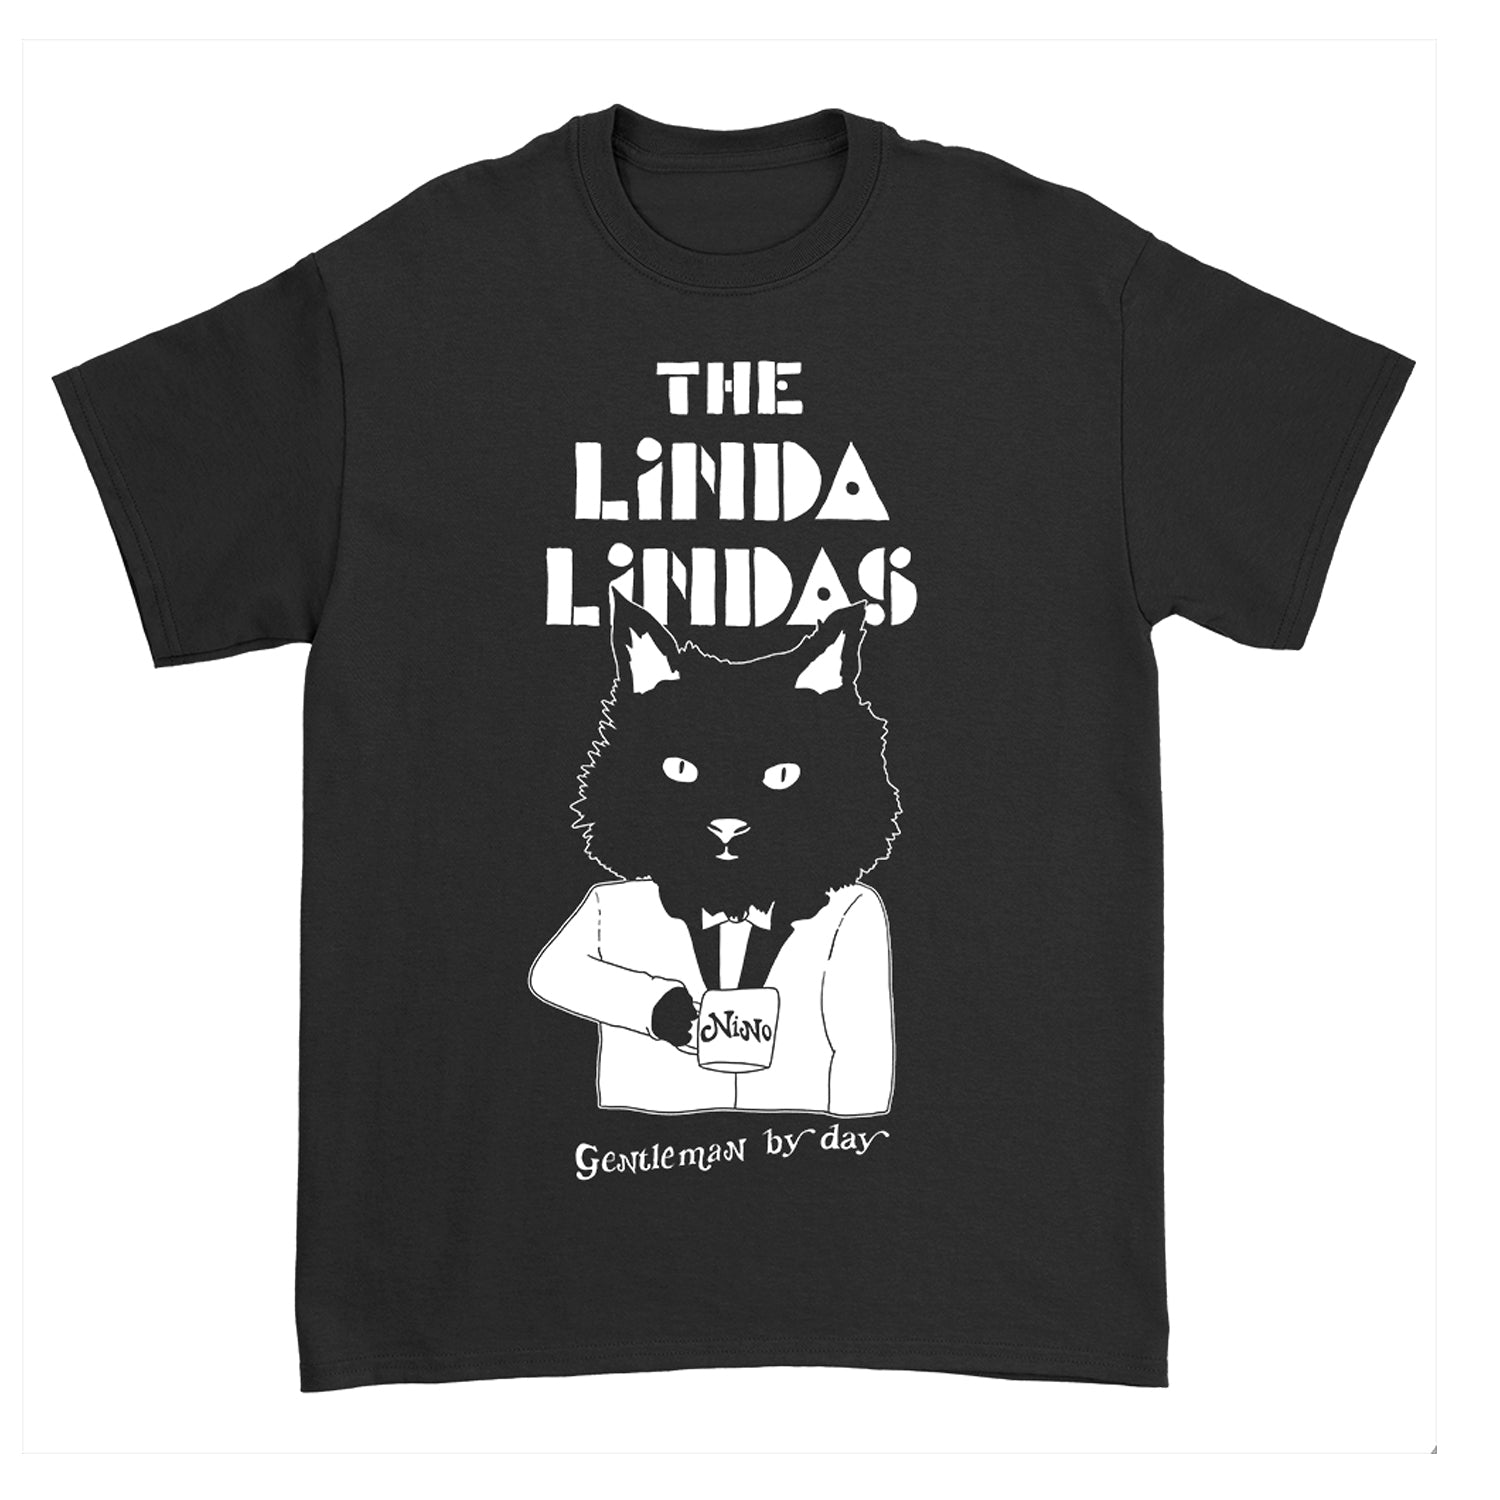 Image of a black tshirt against a white background. The Center of the shirt says the linda lindas in white blocky text. Below that is a graphic of a black cat from the waist up. The cat is wearing a suit and holding a cup of coffee. The coffee cup says "Nino". Below this in thin white text reads "gentleman by day".